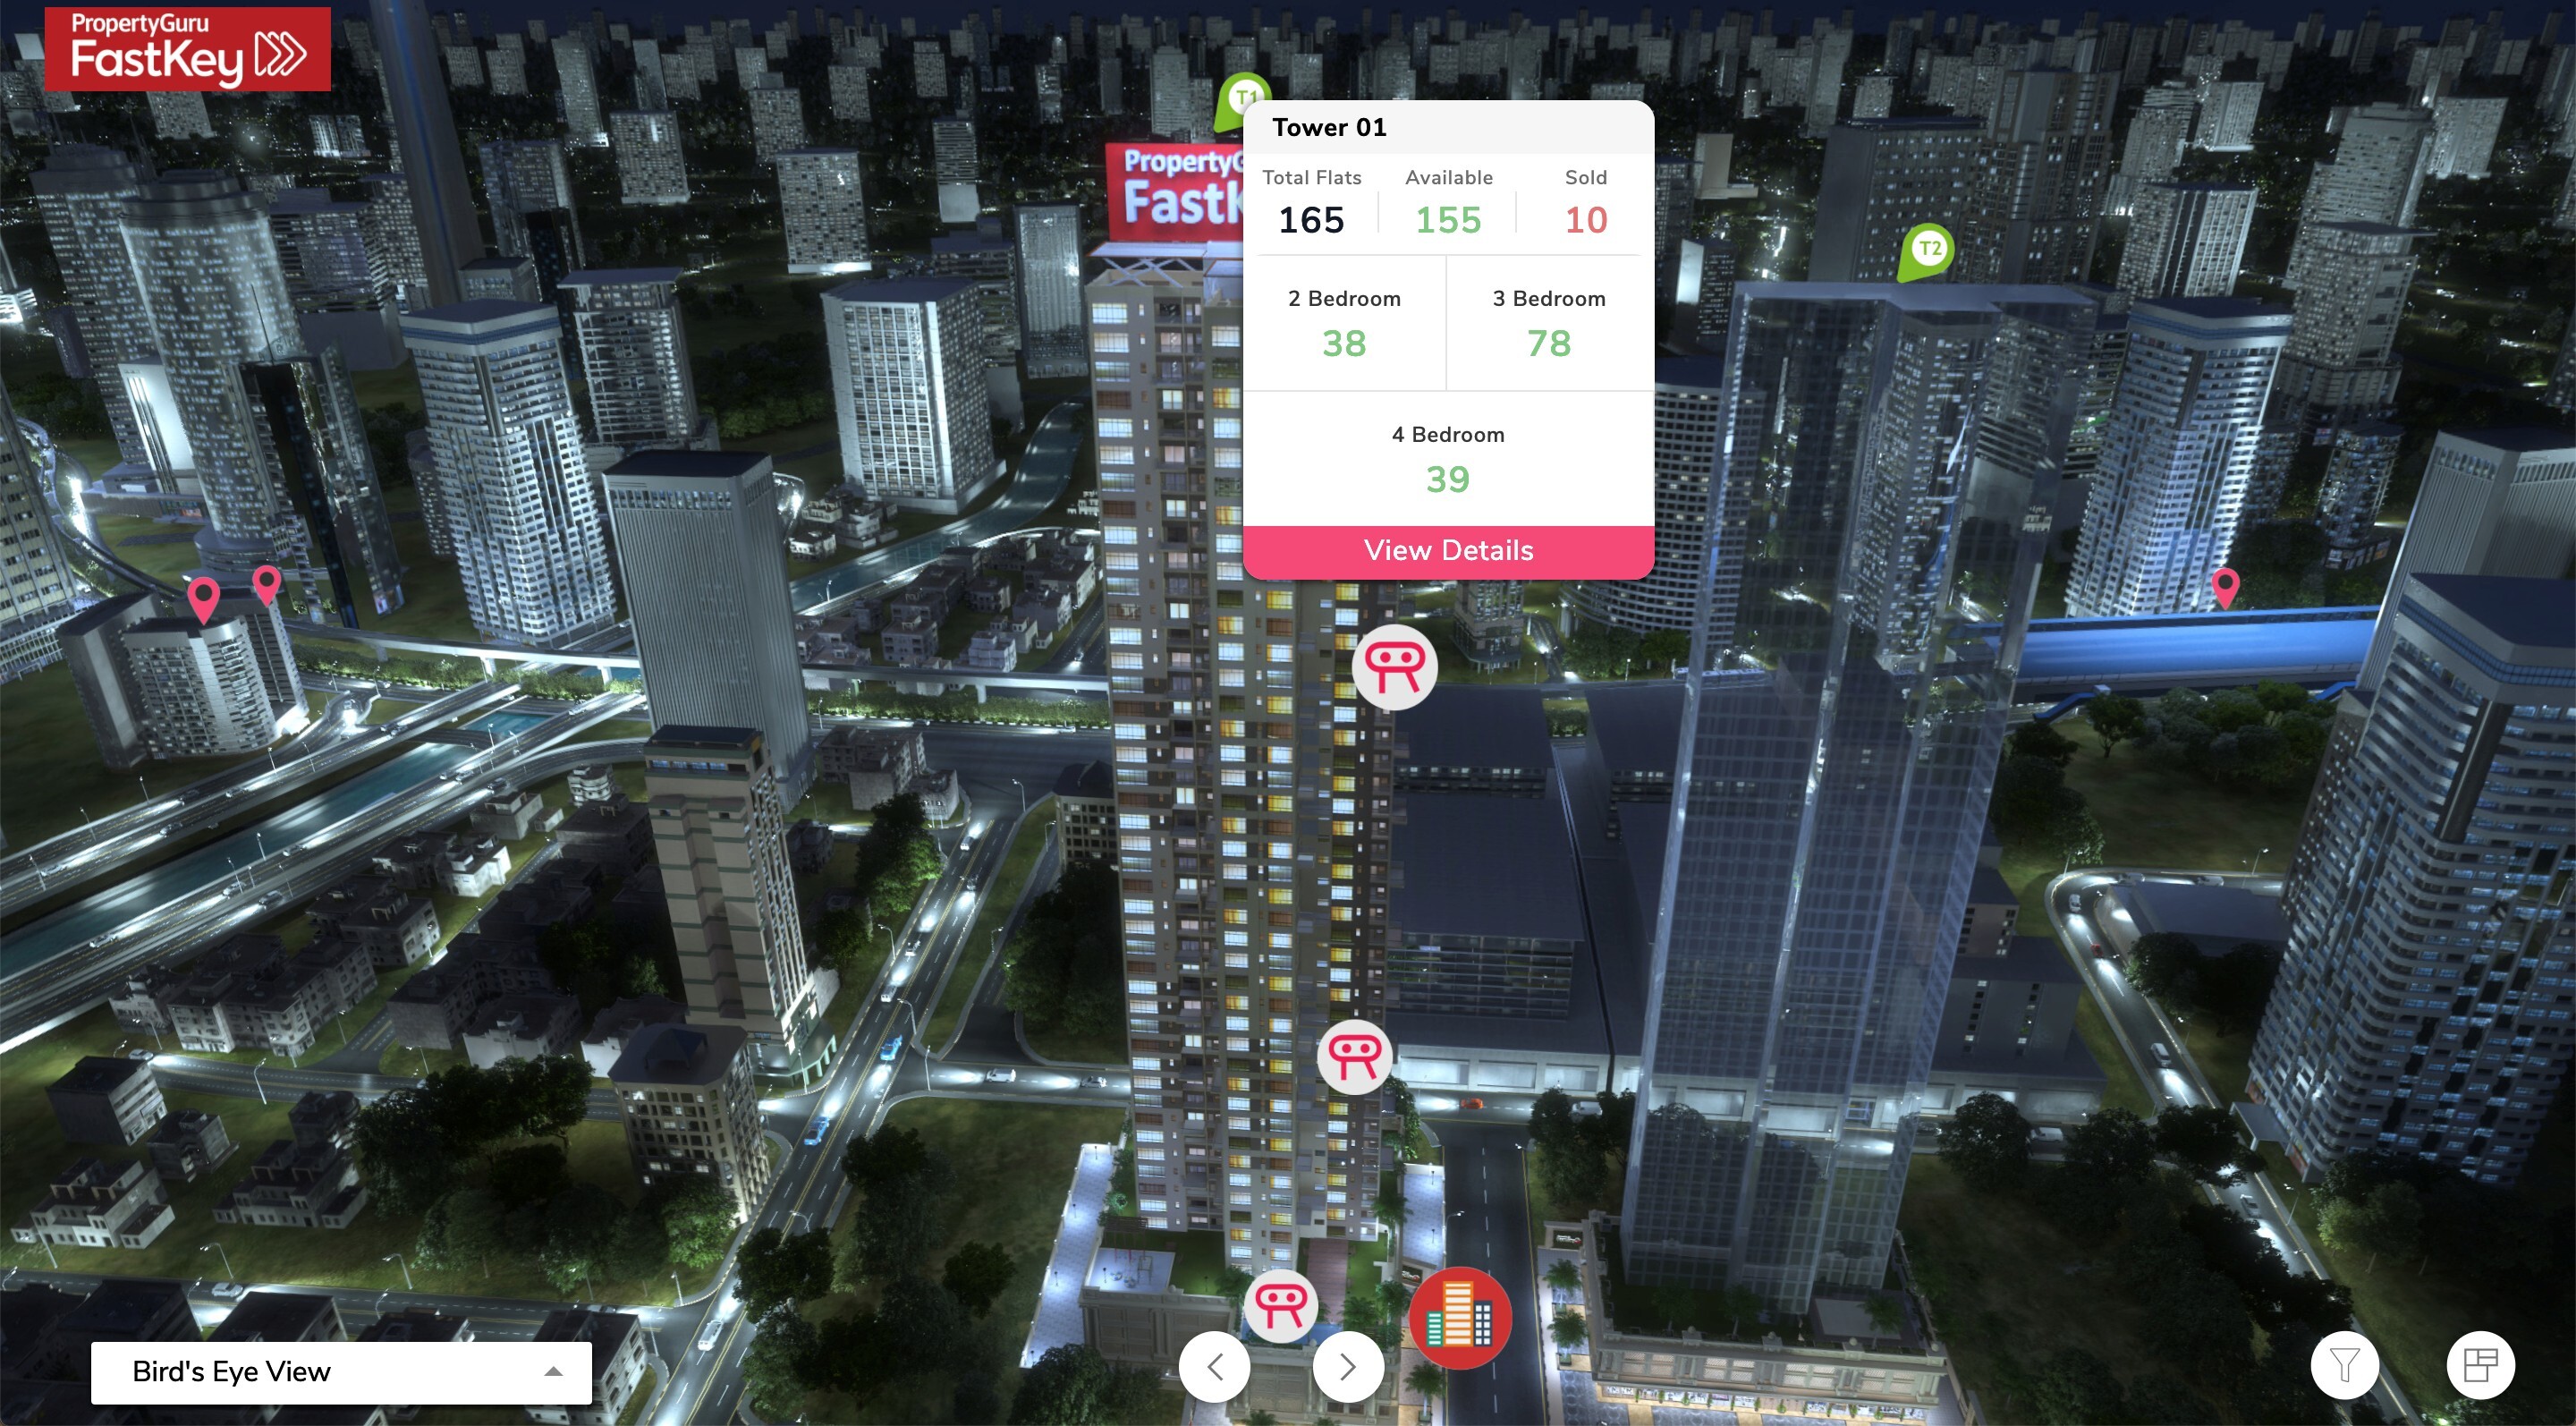 FastKey is PropertyGuru’s cloud software solution for the real estate industry in Southeast Asia. Photo: SCMP Handout